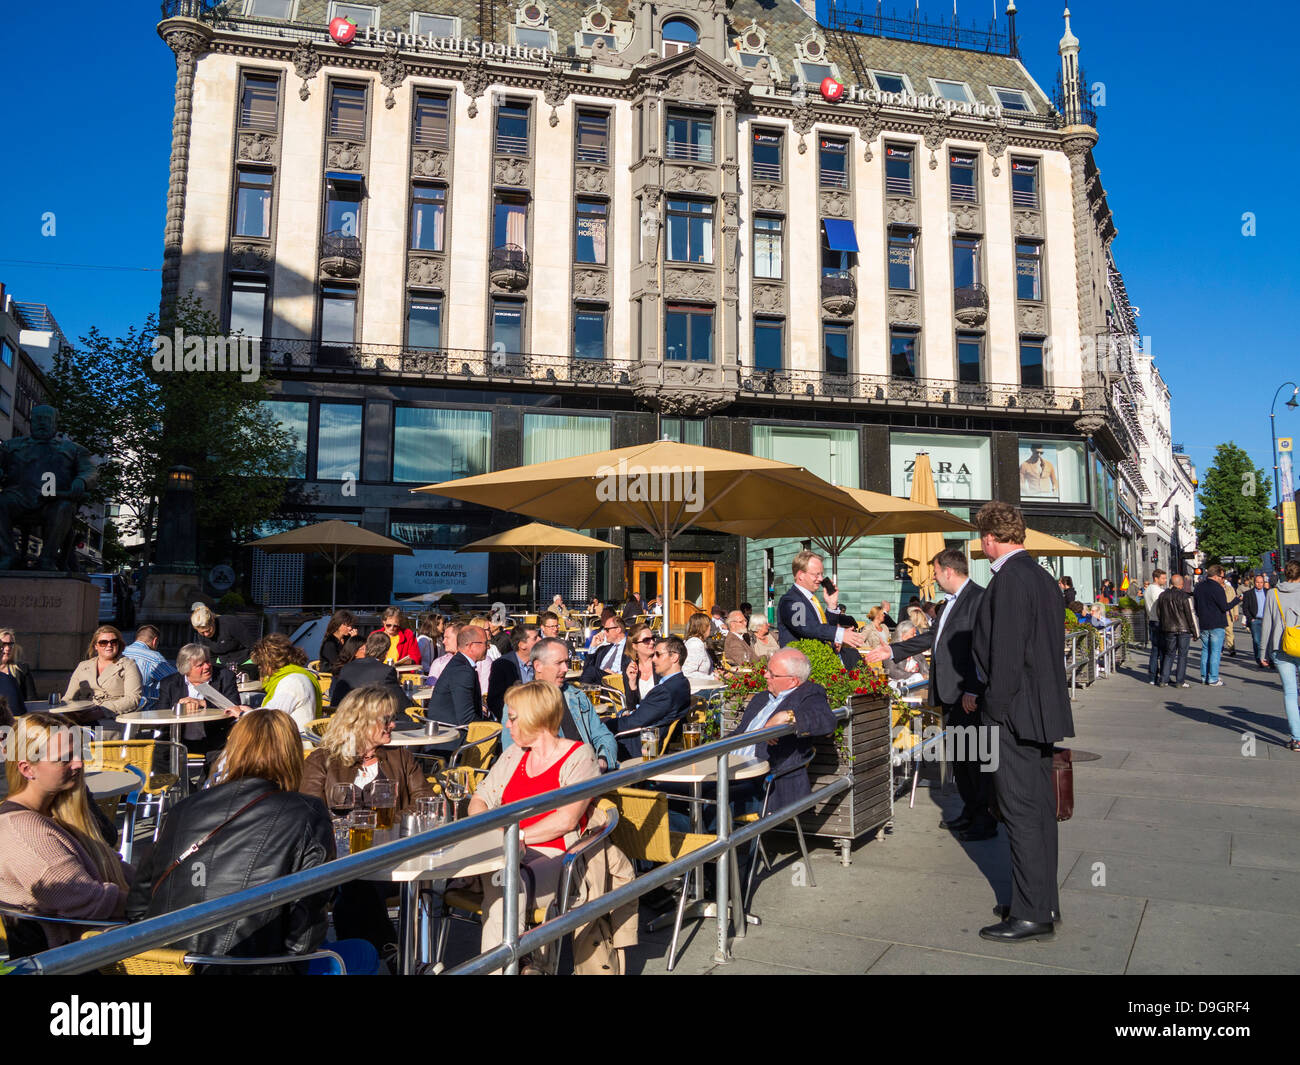 Bar cafe in Oslo, Norway, Scandinavia, Europe in the early evening with people sitting outside in the sun Stock Photo